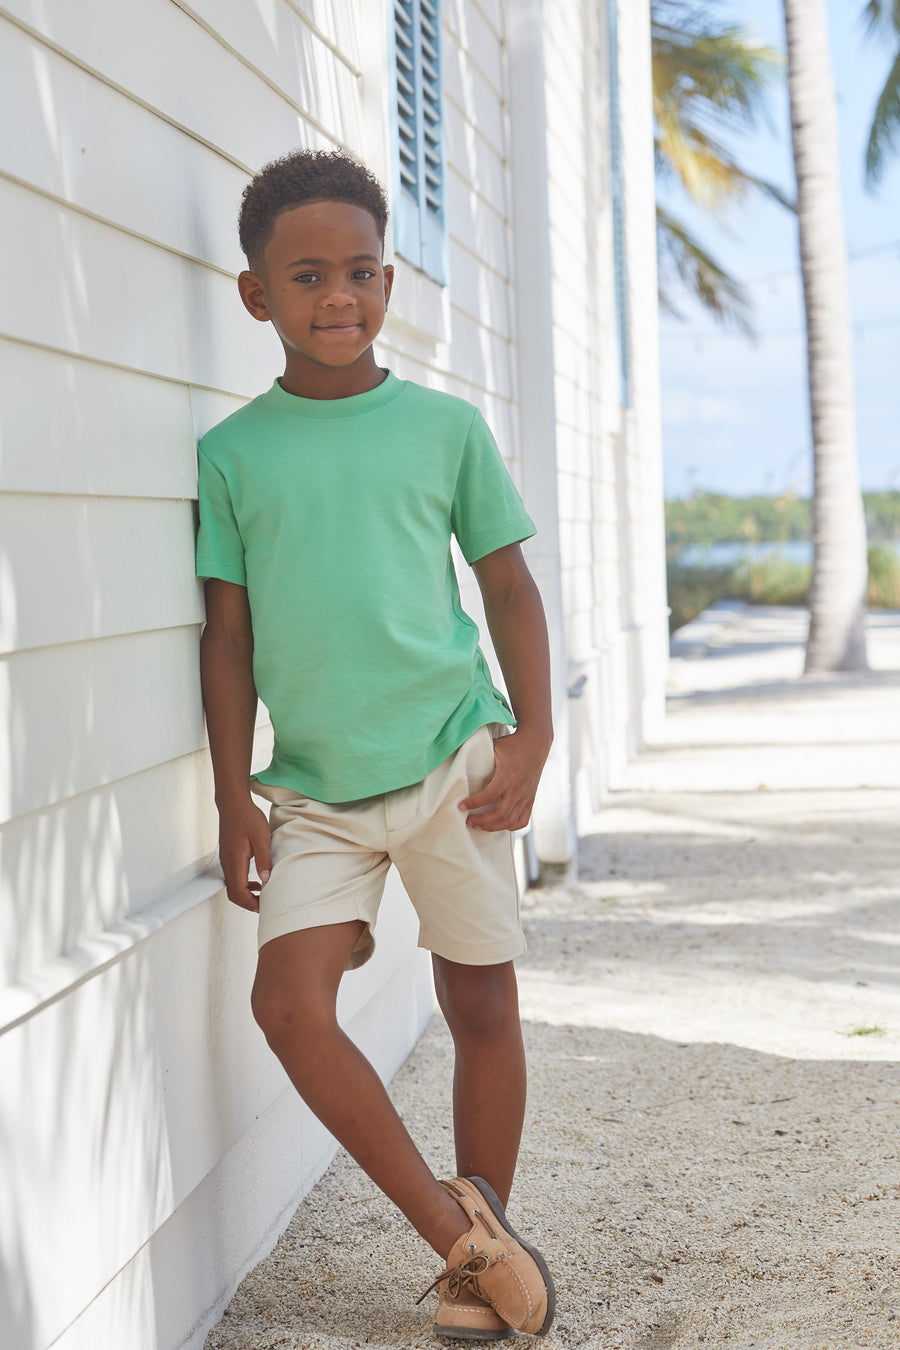 Little English boy’s classic knit tee in green for Spring.